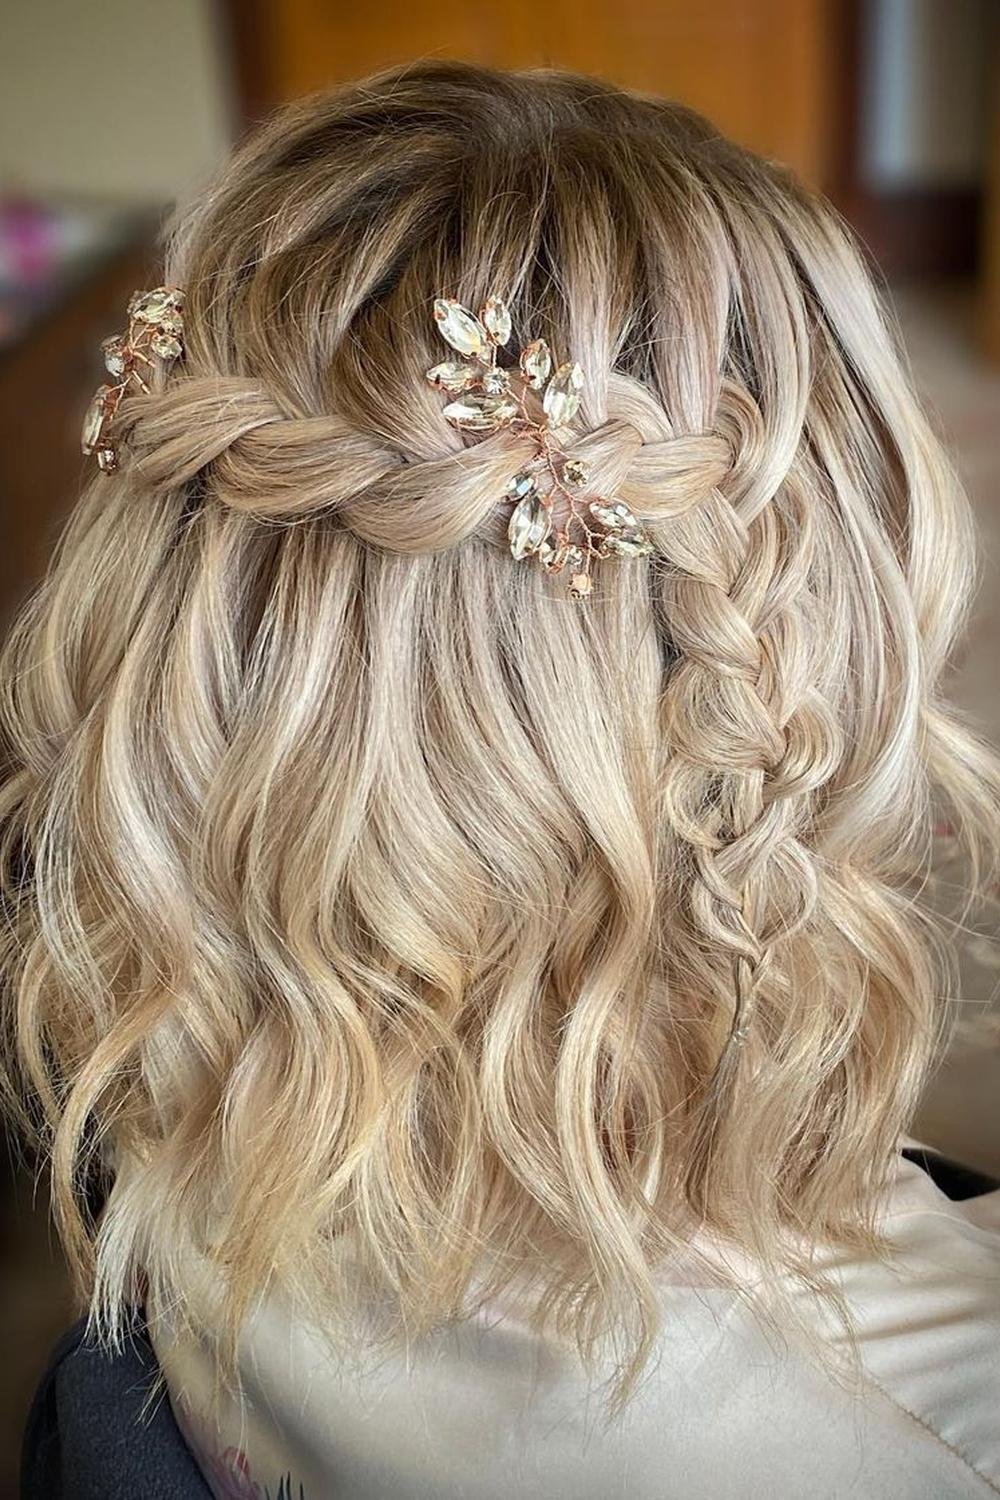 6 - Picture of Braided Hairstyles